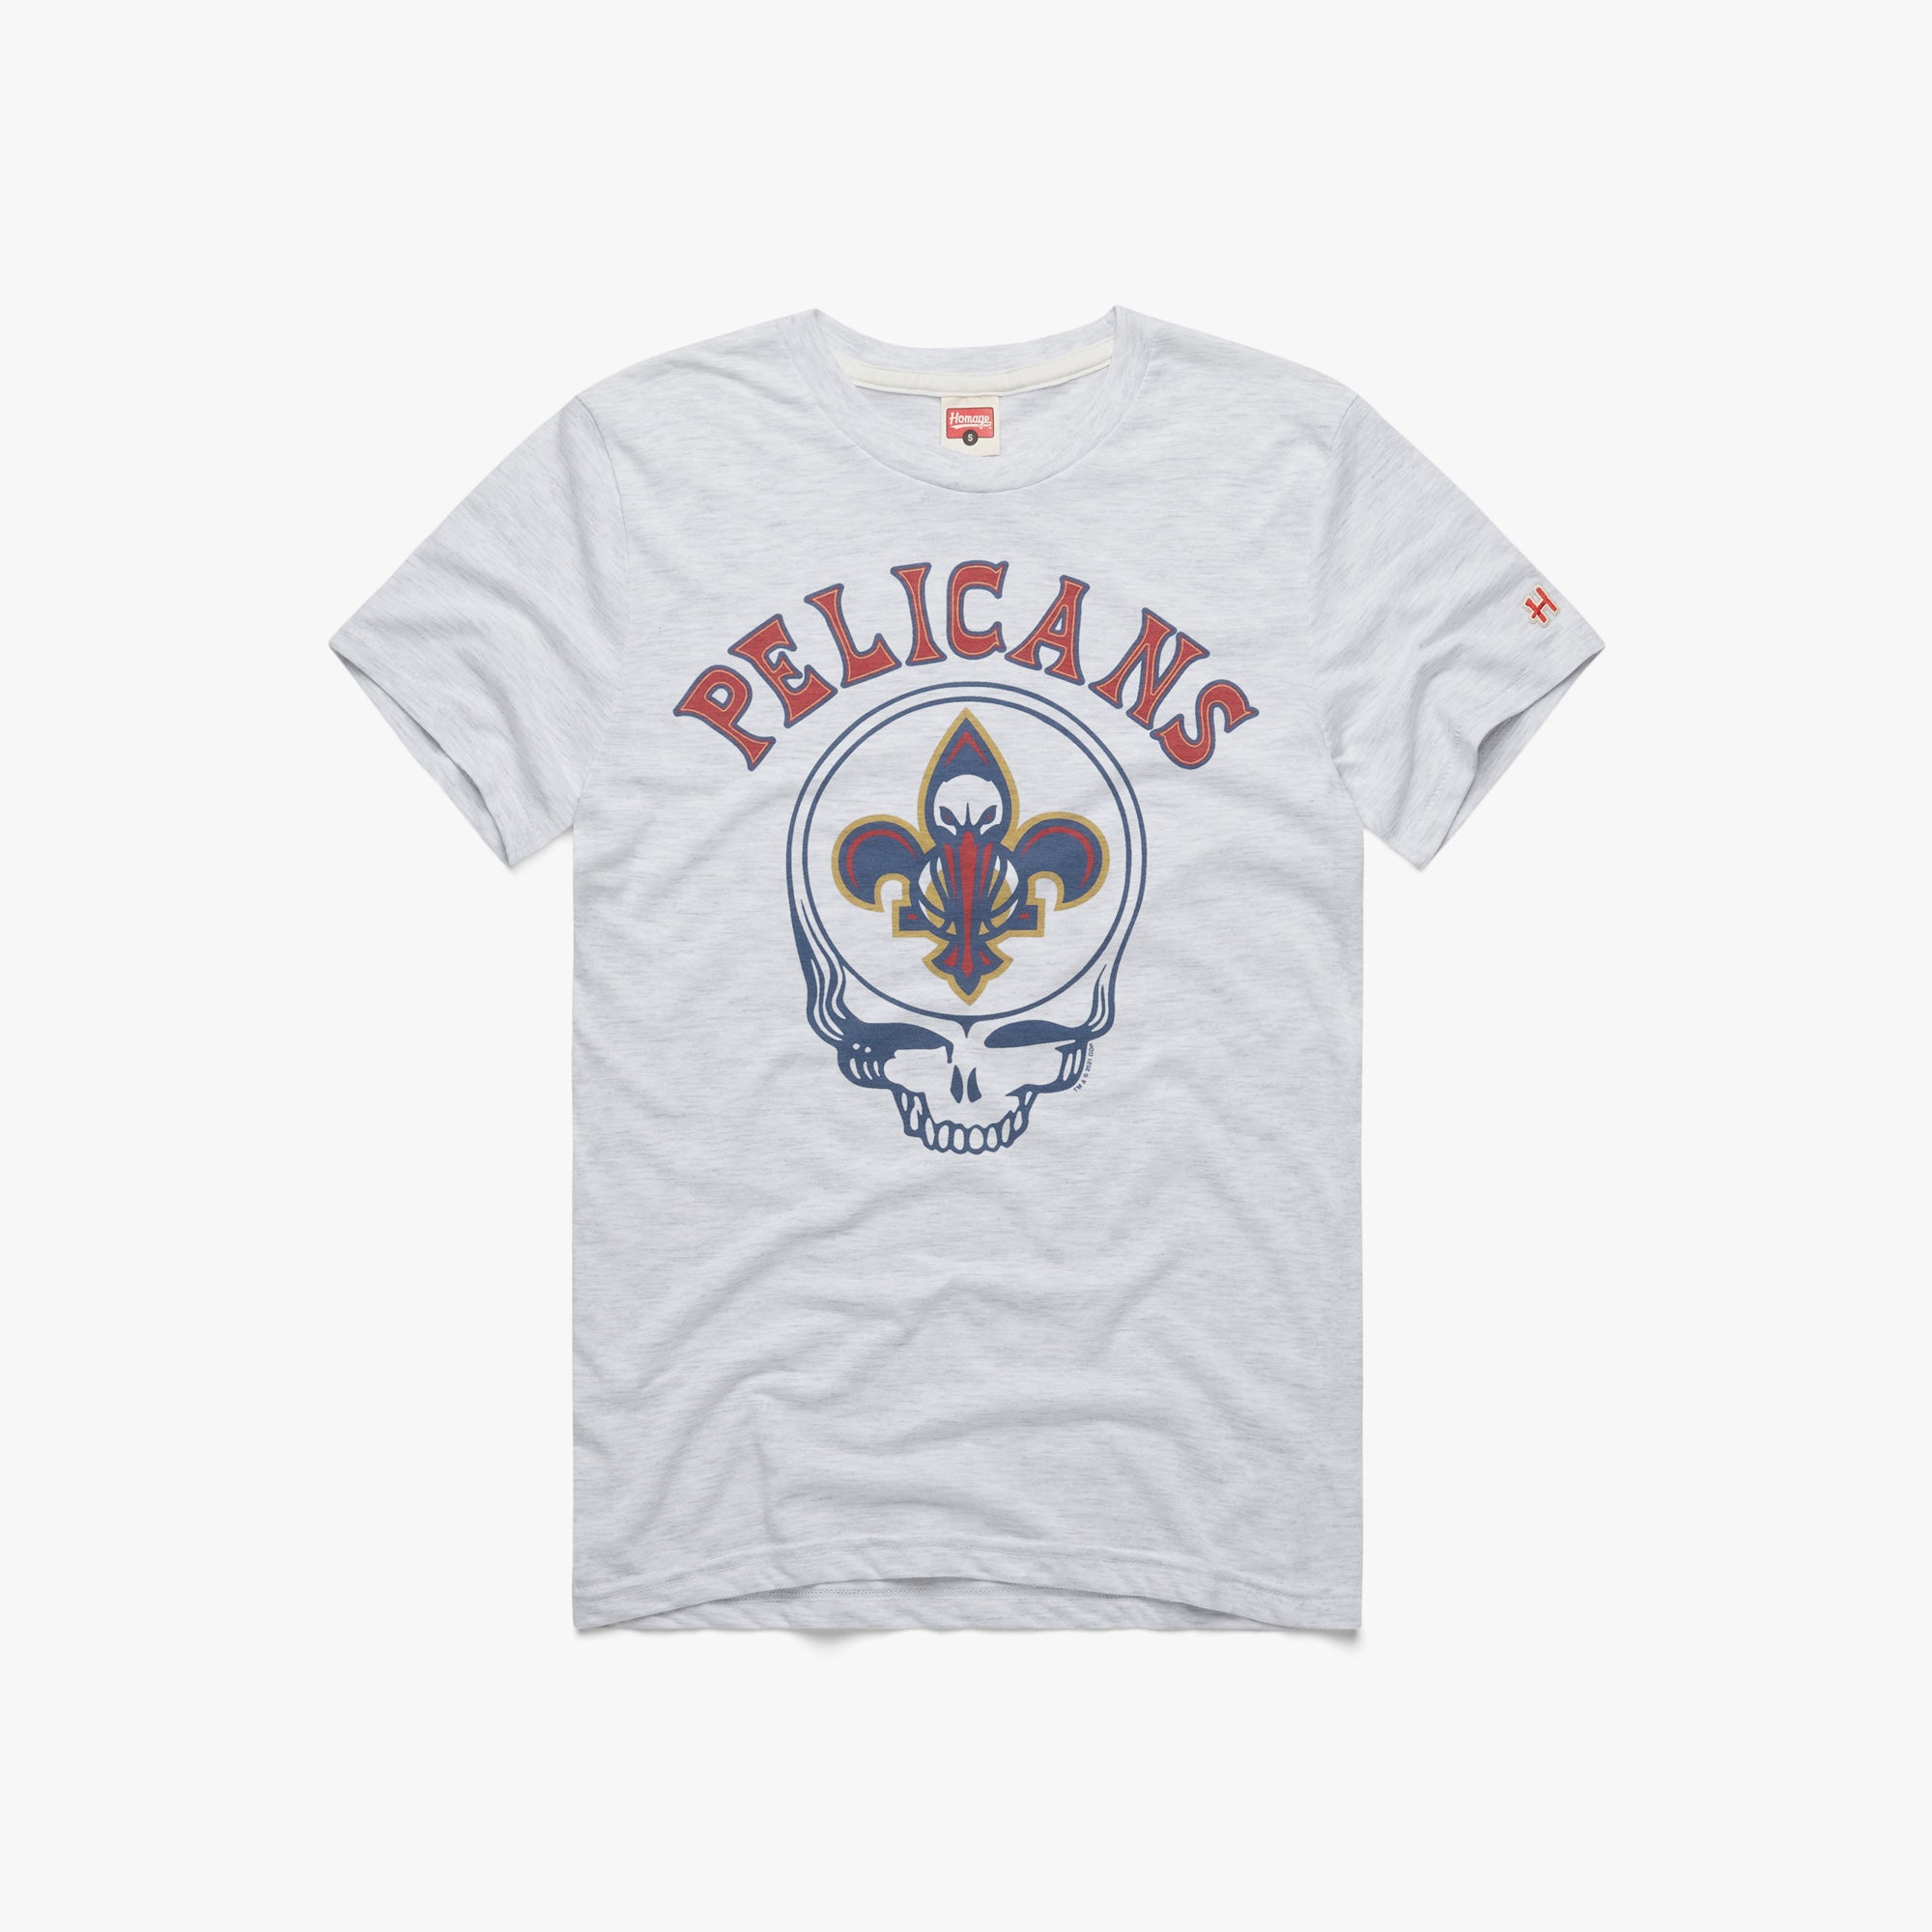 NBA x Grateful Dead x Nuggets Skull T-Shirt from Homage. | Navy | Vintage Apparel from Homage.